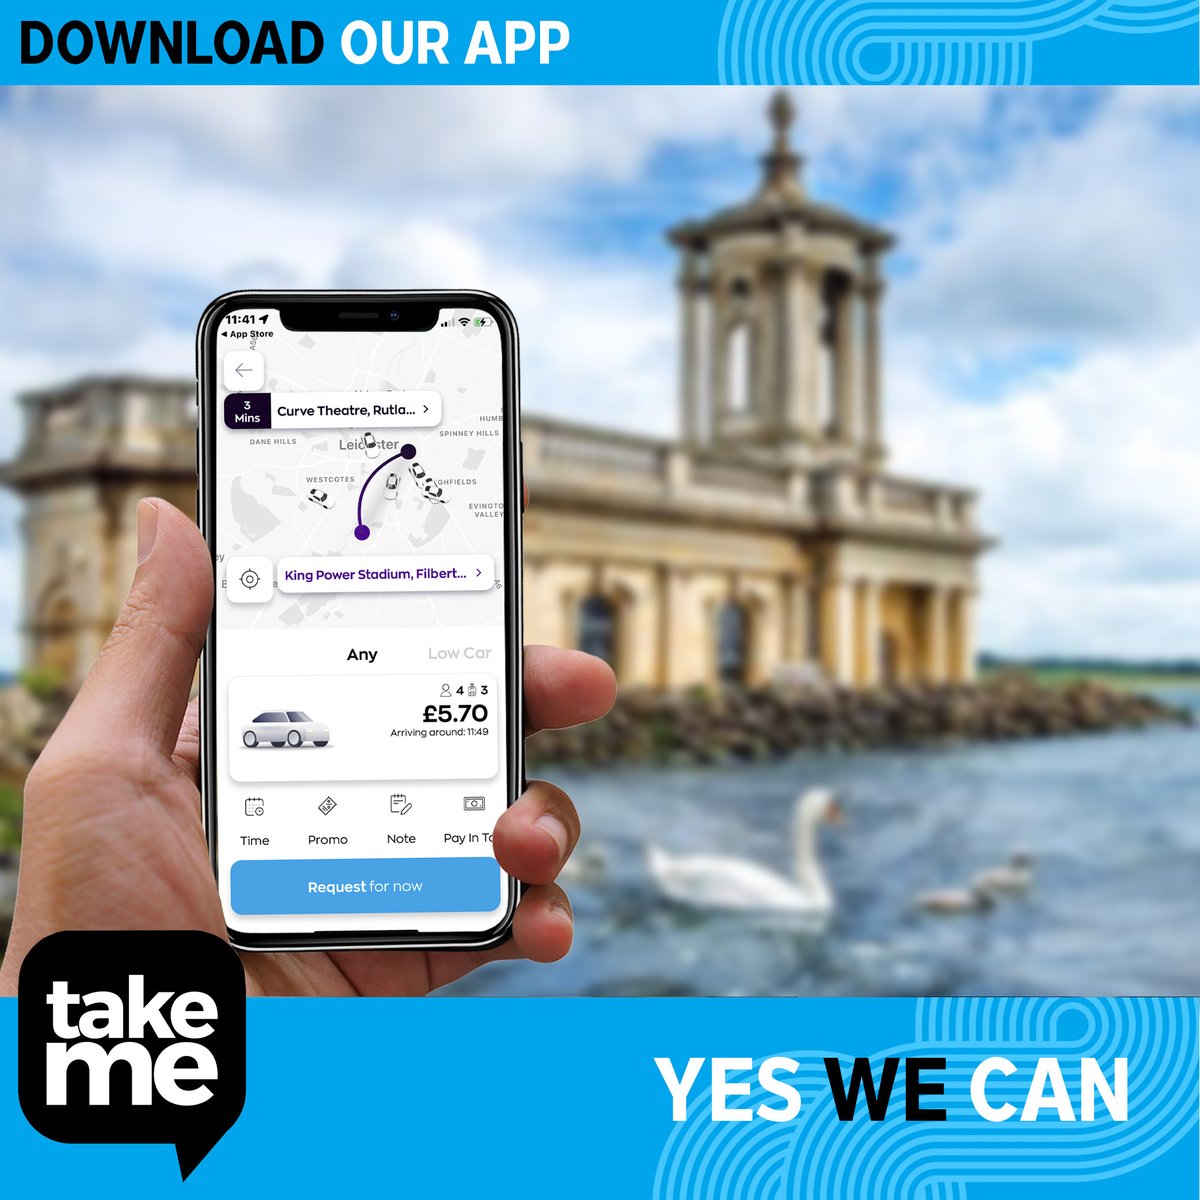 Visiting around Leicestershire’s amazing scenery and need a lift? Download our app and pre book today: takeme.taxi/app/ #TakeMe #Leicester #Loughborough